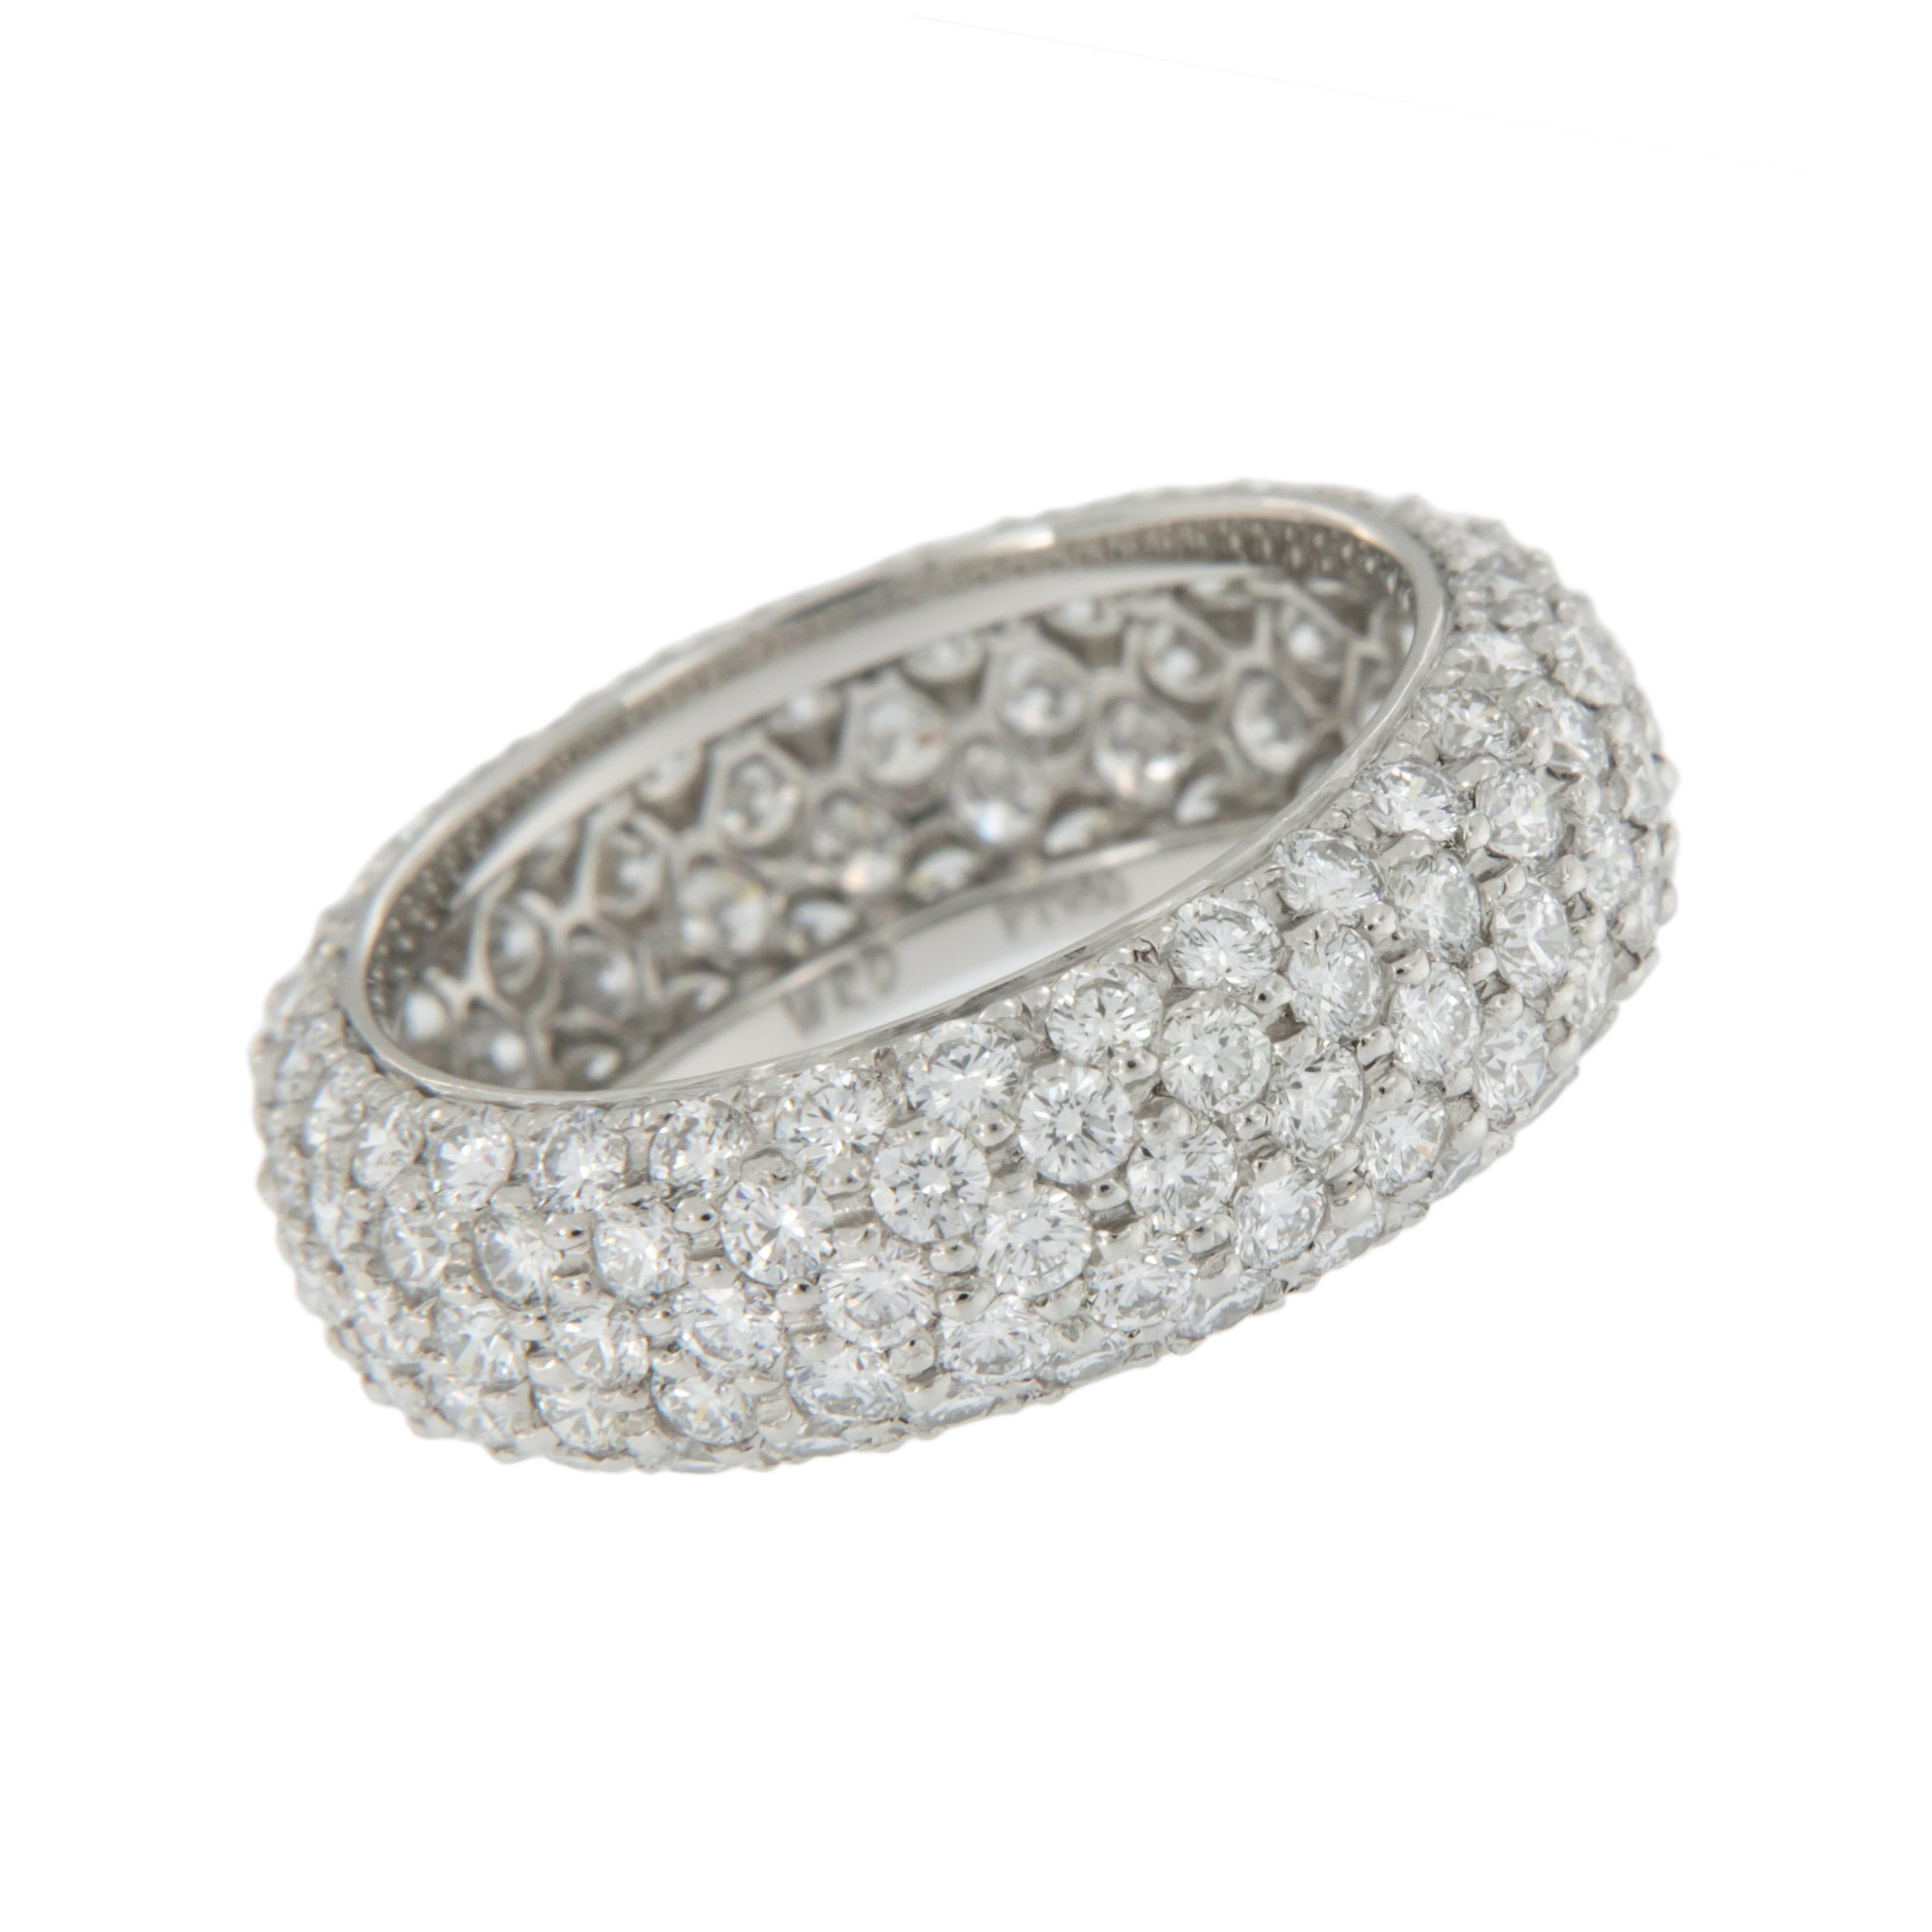 Handmade in New York City with absolutely the finest diamonds and noble platinum this eternity band by William Rosenberg is impressive with 3 rows pave' set round brilliant diamonds = 3.00 Cttw. These exceptional diamonds are of VVS clarity & D-F